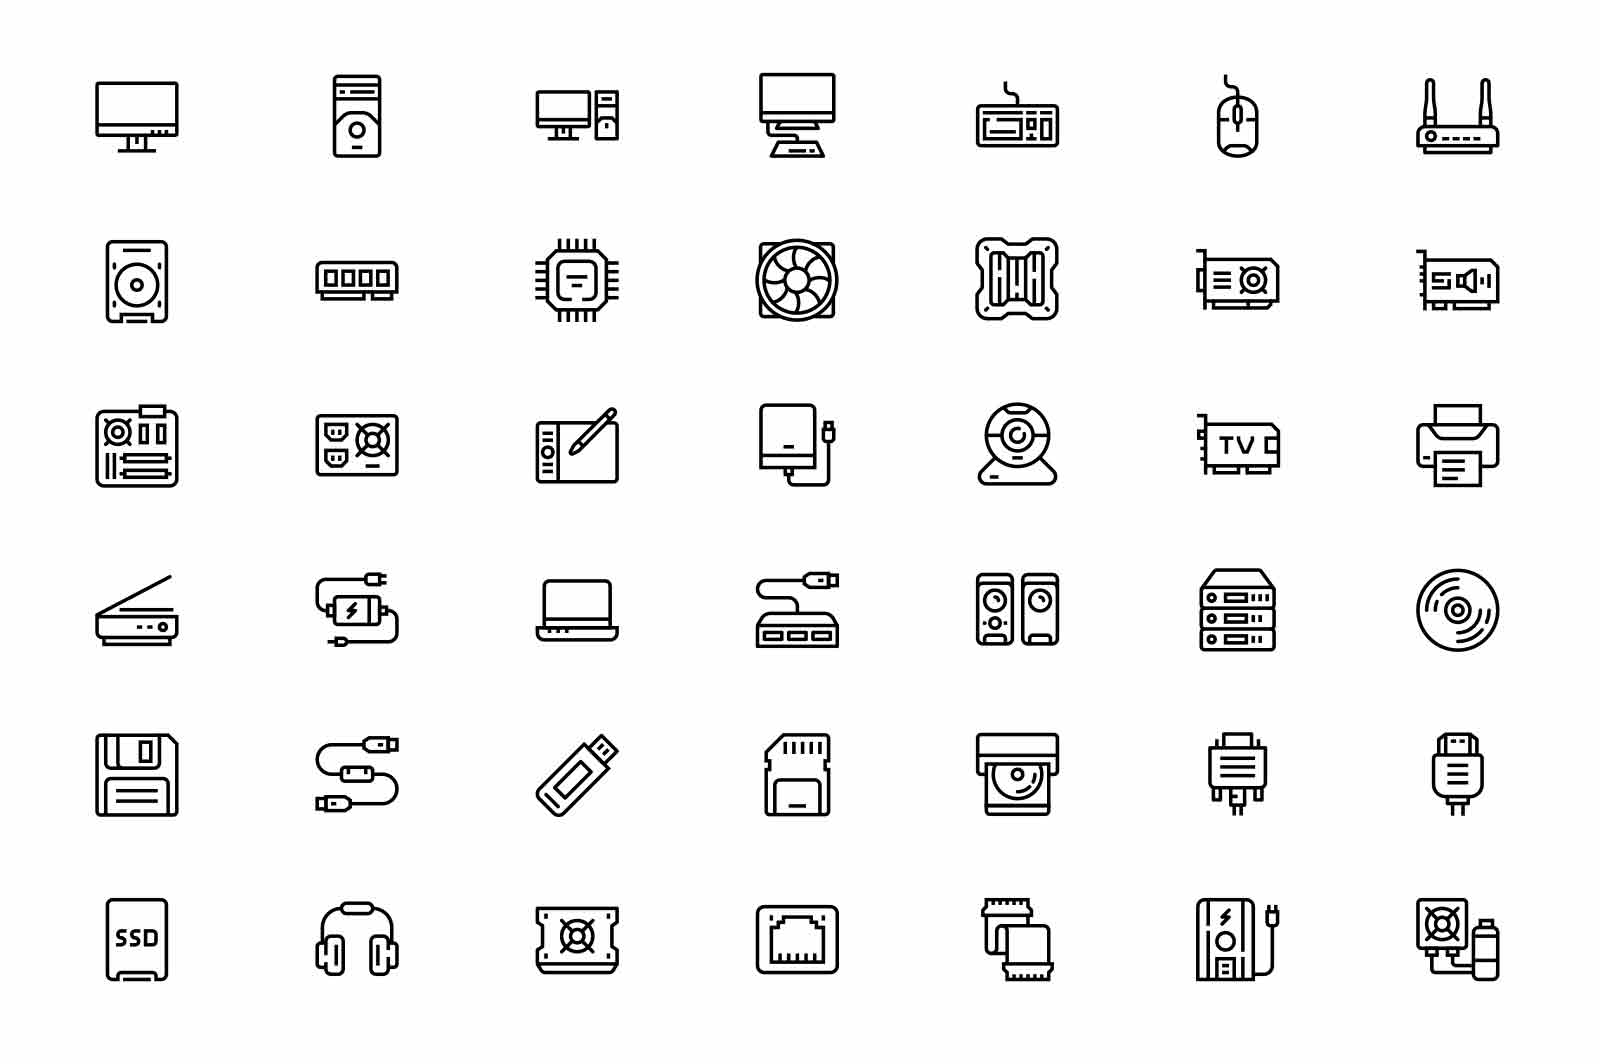 Modern digital devices icons set vector illustration. Computers and accessories line icon. Technology and electronics concept